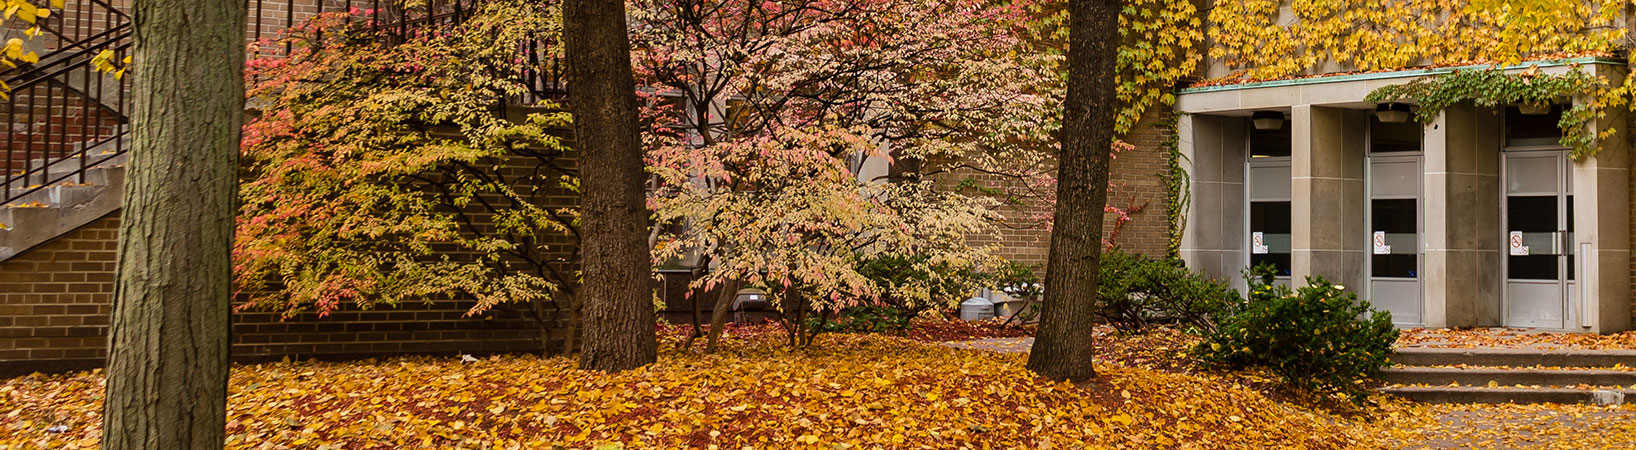 Kerr Hall North with colourful orange, red and yellow fall leaves.